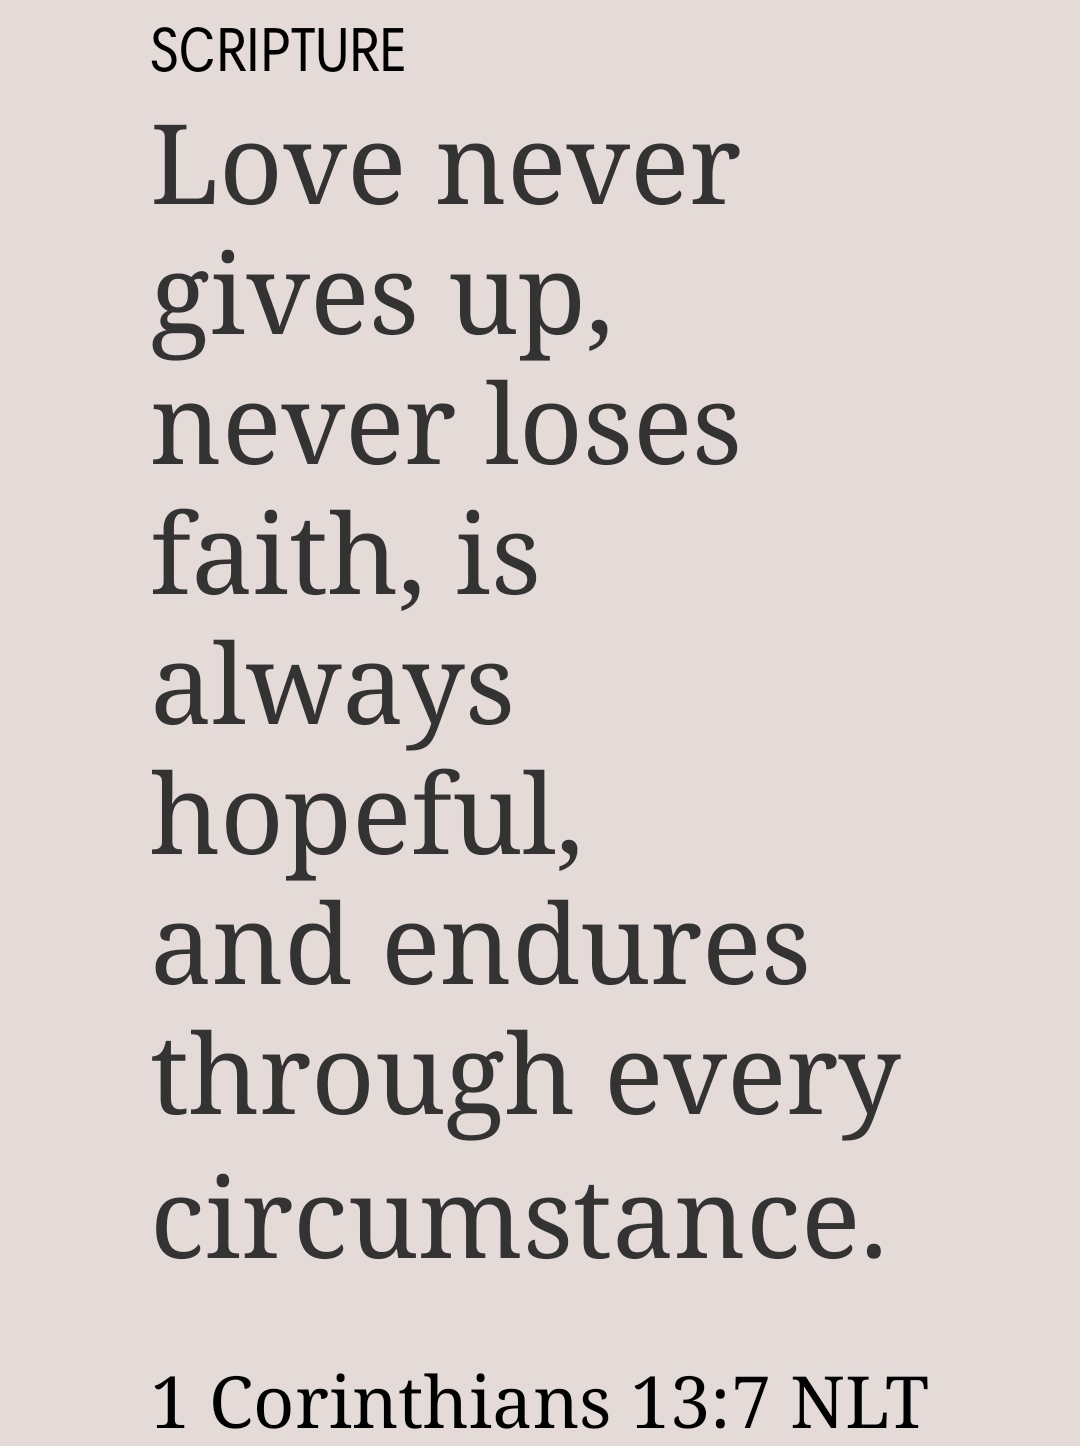 Love never gives up, never loses faith, is always hopeful, and endures through every circumstance. 1 Corinthians 13:7 NLT https://bible.com/bible/116/1co.13.7.NLT